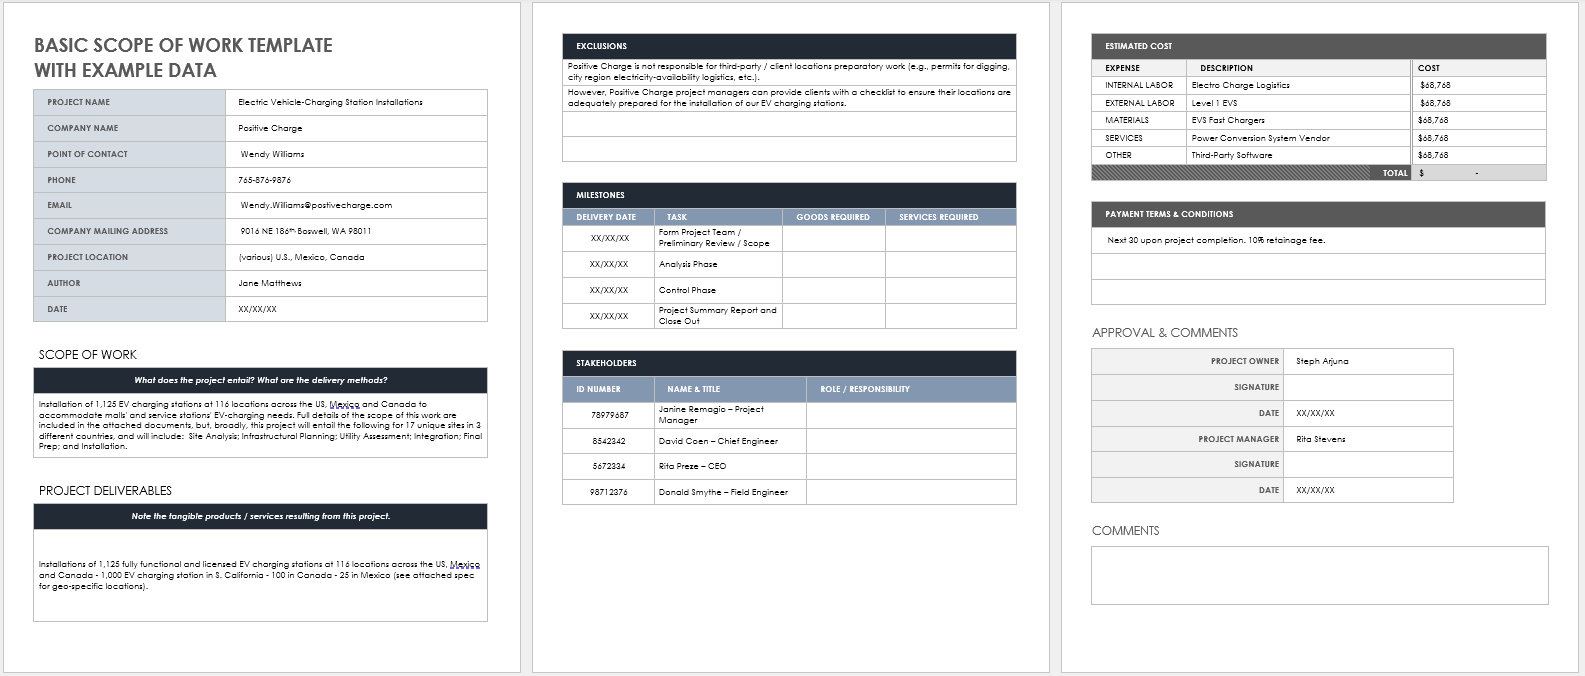 Basic Scope of Work Template with Example Data